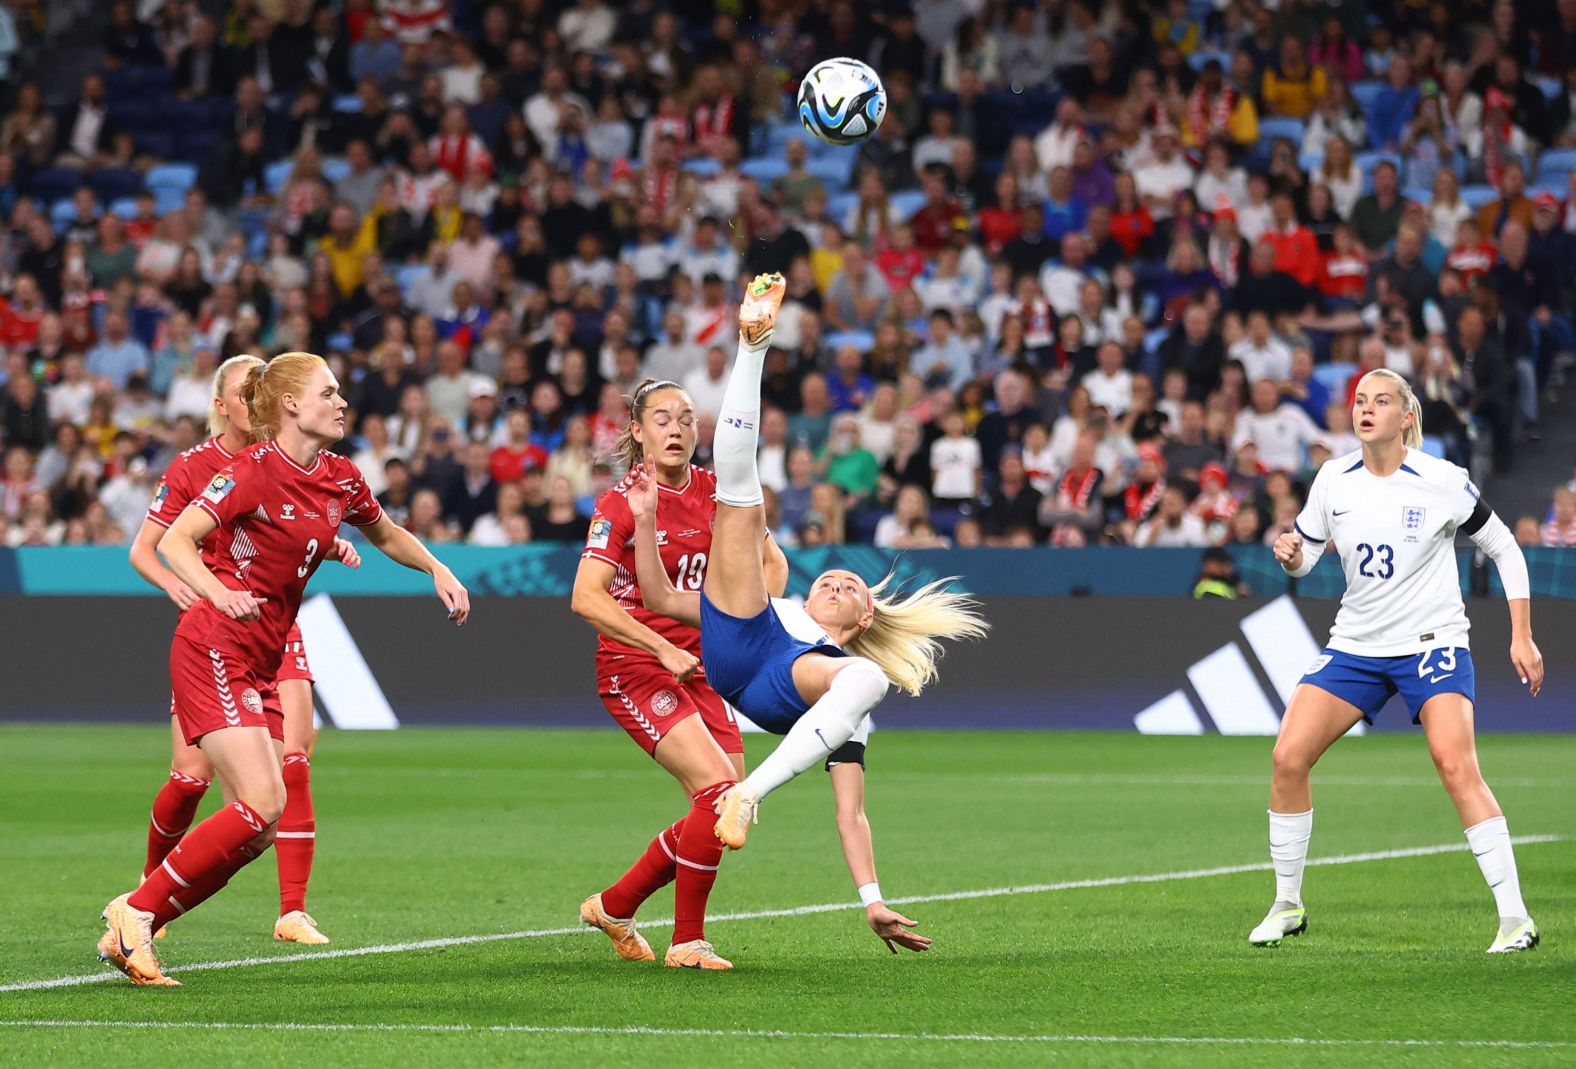 England's Chloe Kelly attempts a bicycle kick versus Denmark on July 28. <a href="index.php?page=&url=https%3A%2F%2Fwww.cnn.com%2F2023%2F07%2F27%2Ffootball%2Fengland-argentina-china-womens-world-cup-spt-intl%2Findex.html" target="_blank">England won 1-0</a>.